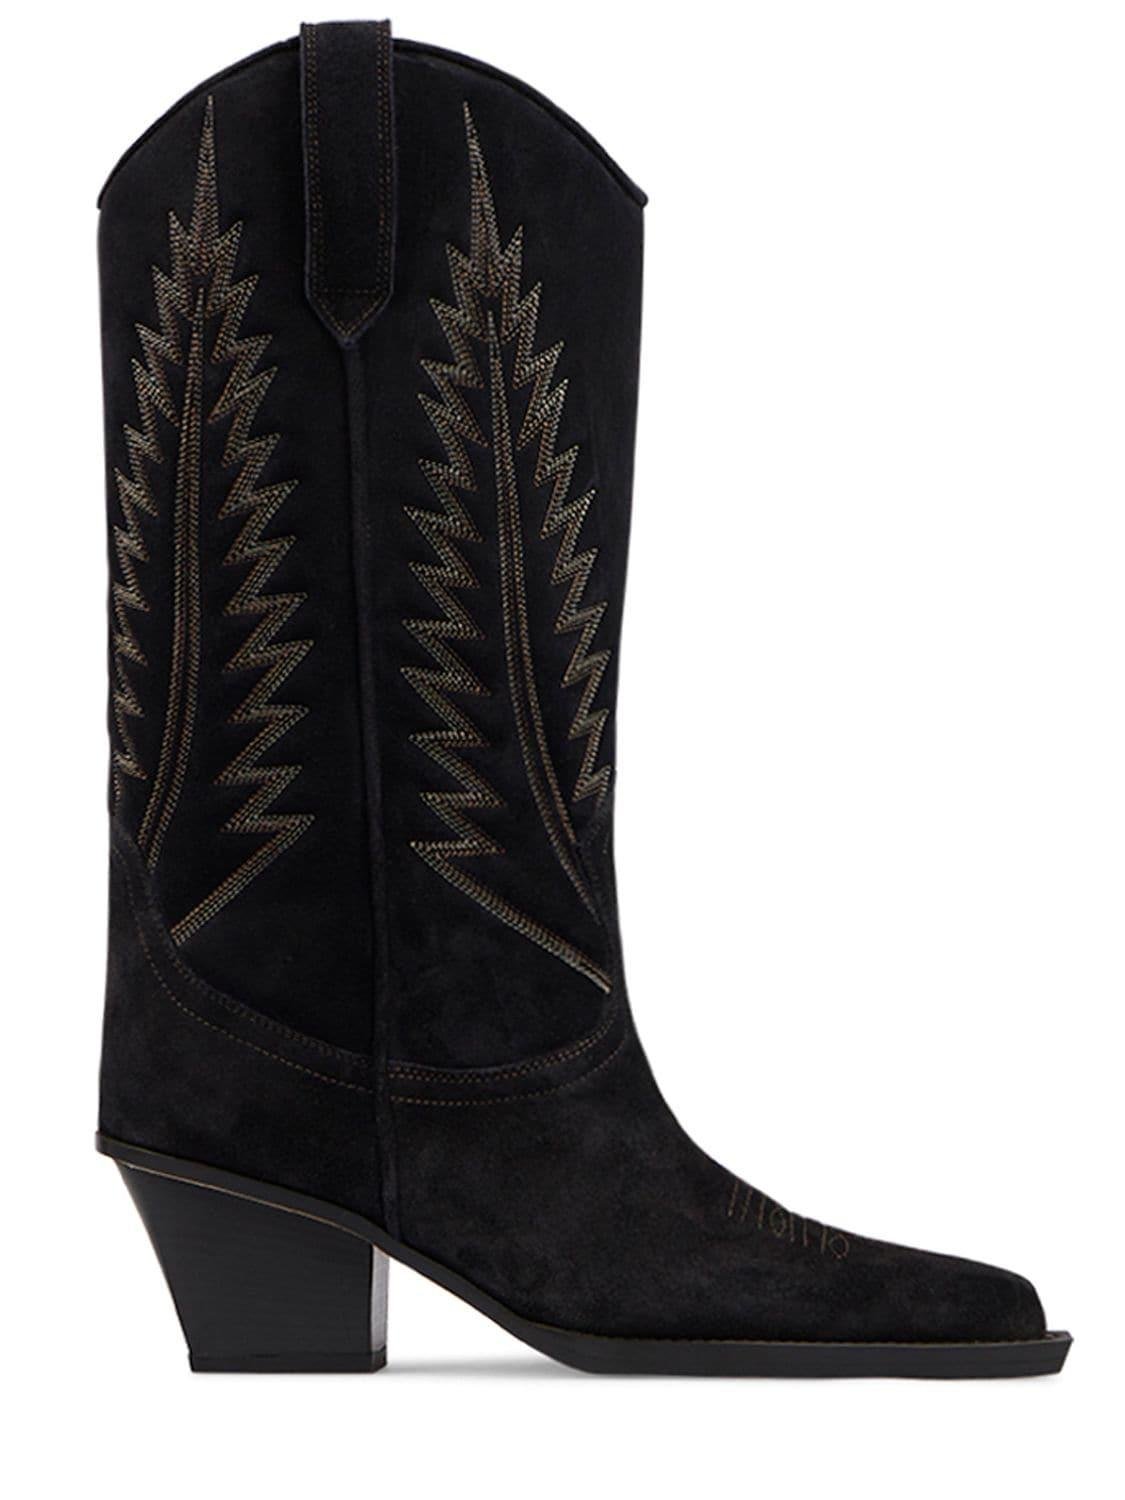 60mm Rosario Suede Tall Boots by PARIS TEXAS